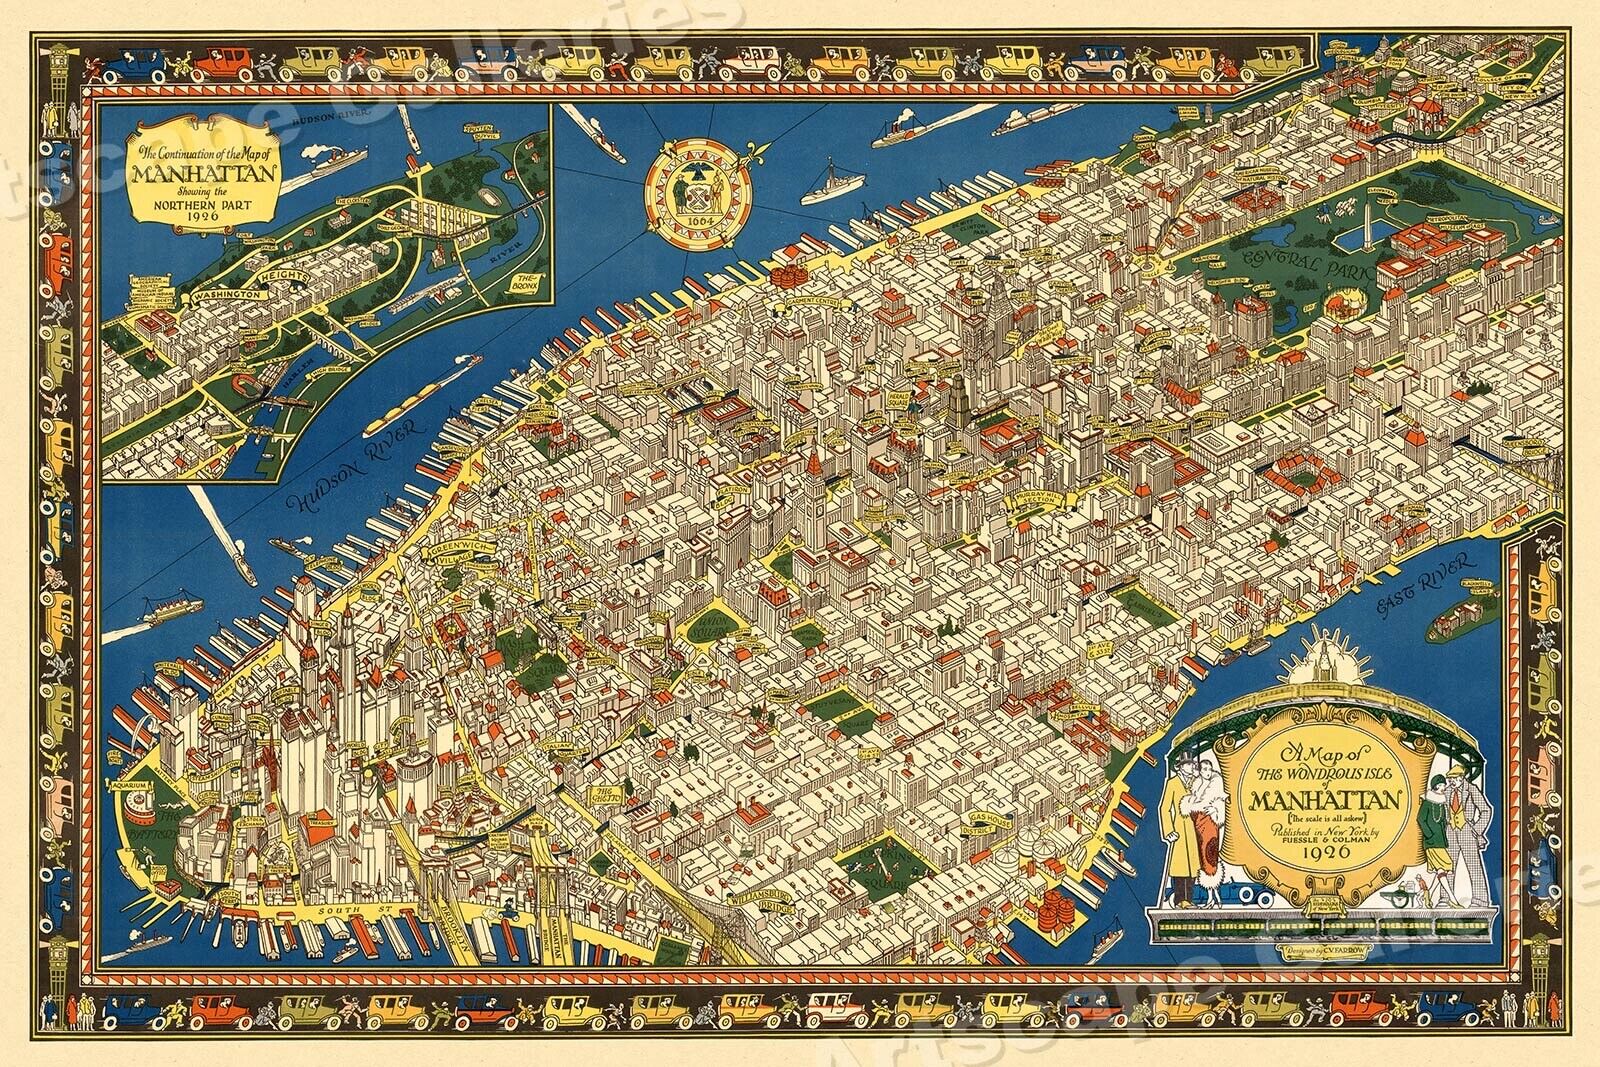 1920s Pictorial New York City Map of Manhattan - 24x36